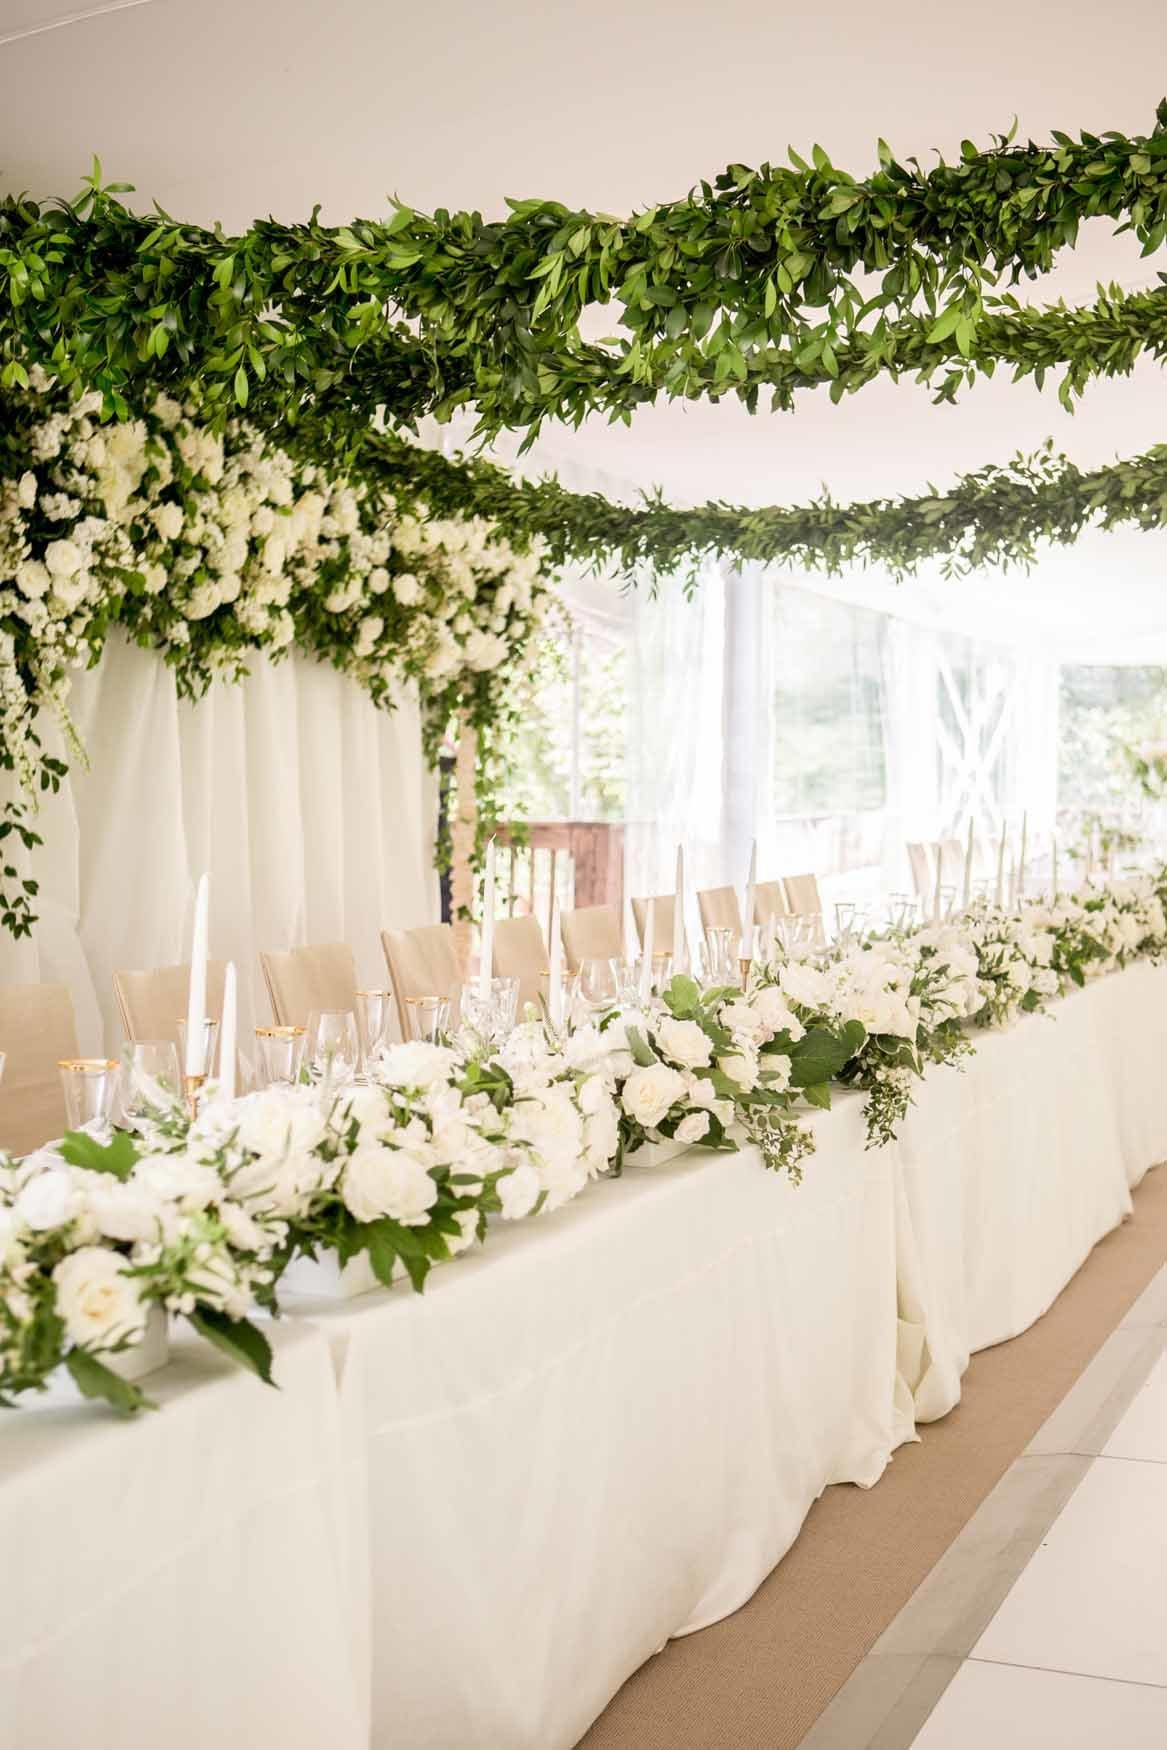 Grand tent wedding head table with white floral  and green garlands on ceiling